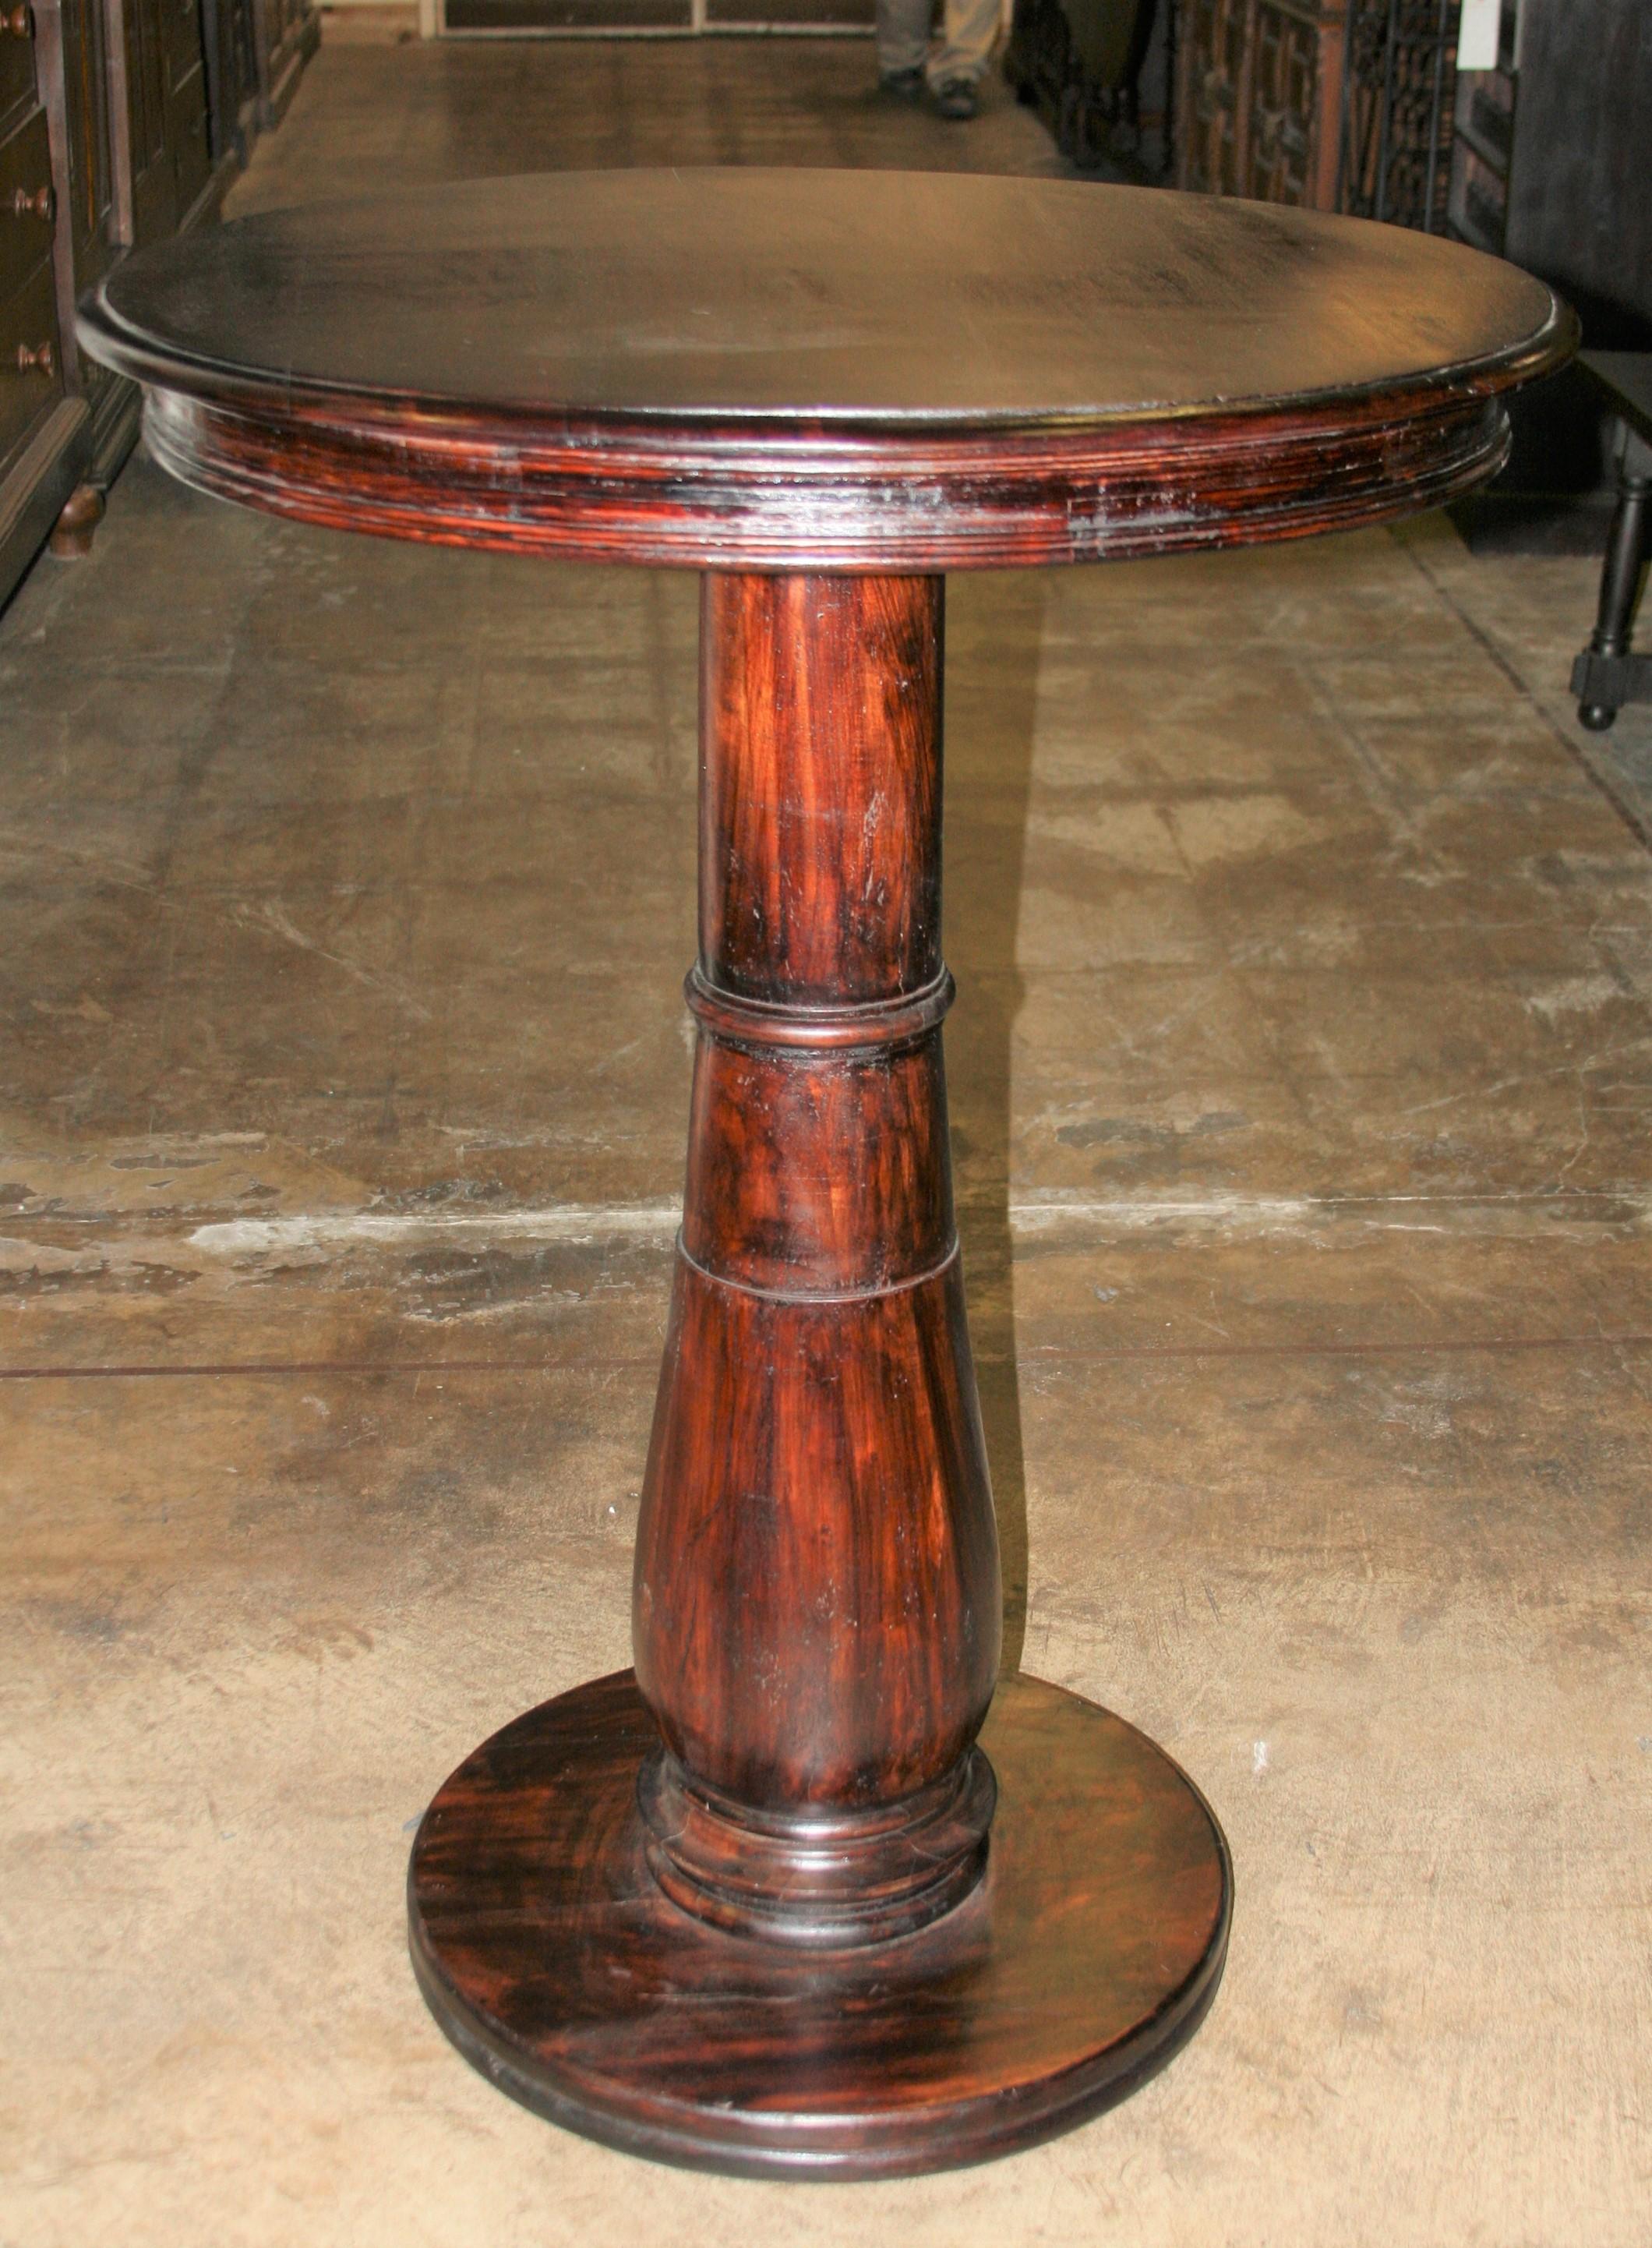 Simple but elegant mahogany breakfast bar table for luxury penthouses. The round top is held by a robust solid wooden columnar support on a solid wood round base. This table will make a statement in any opulent setting. Will last several decades.